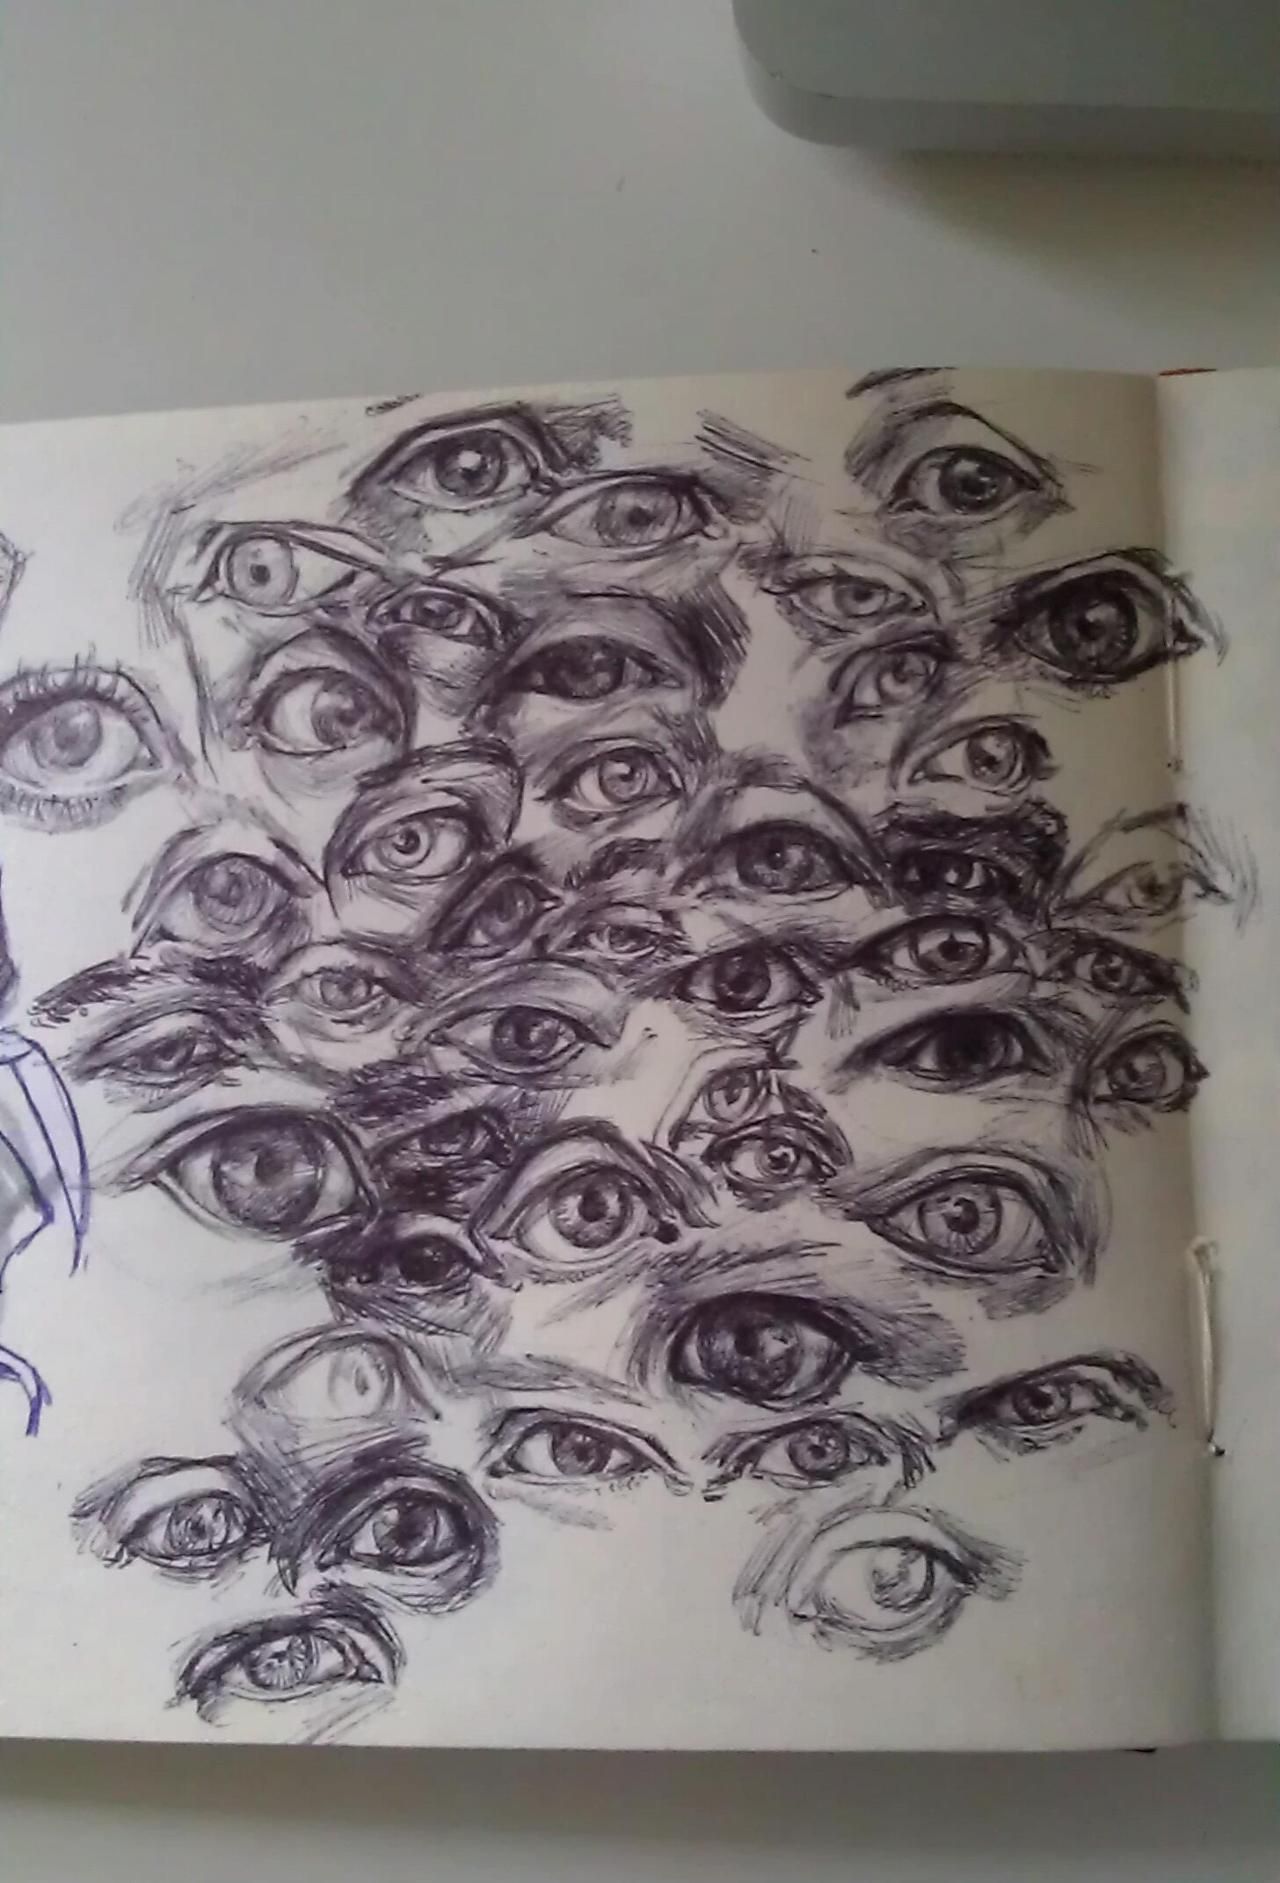 janeisrad: Sketchbook page of eyeballs. Thinking about the lid wrapping around t